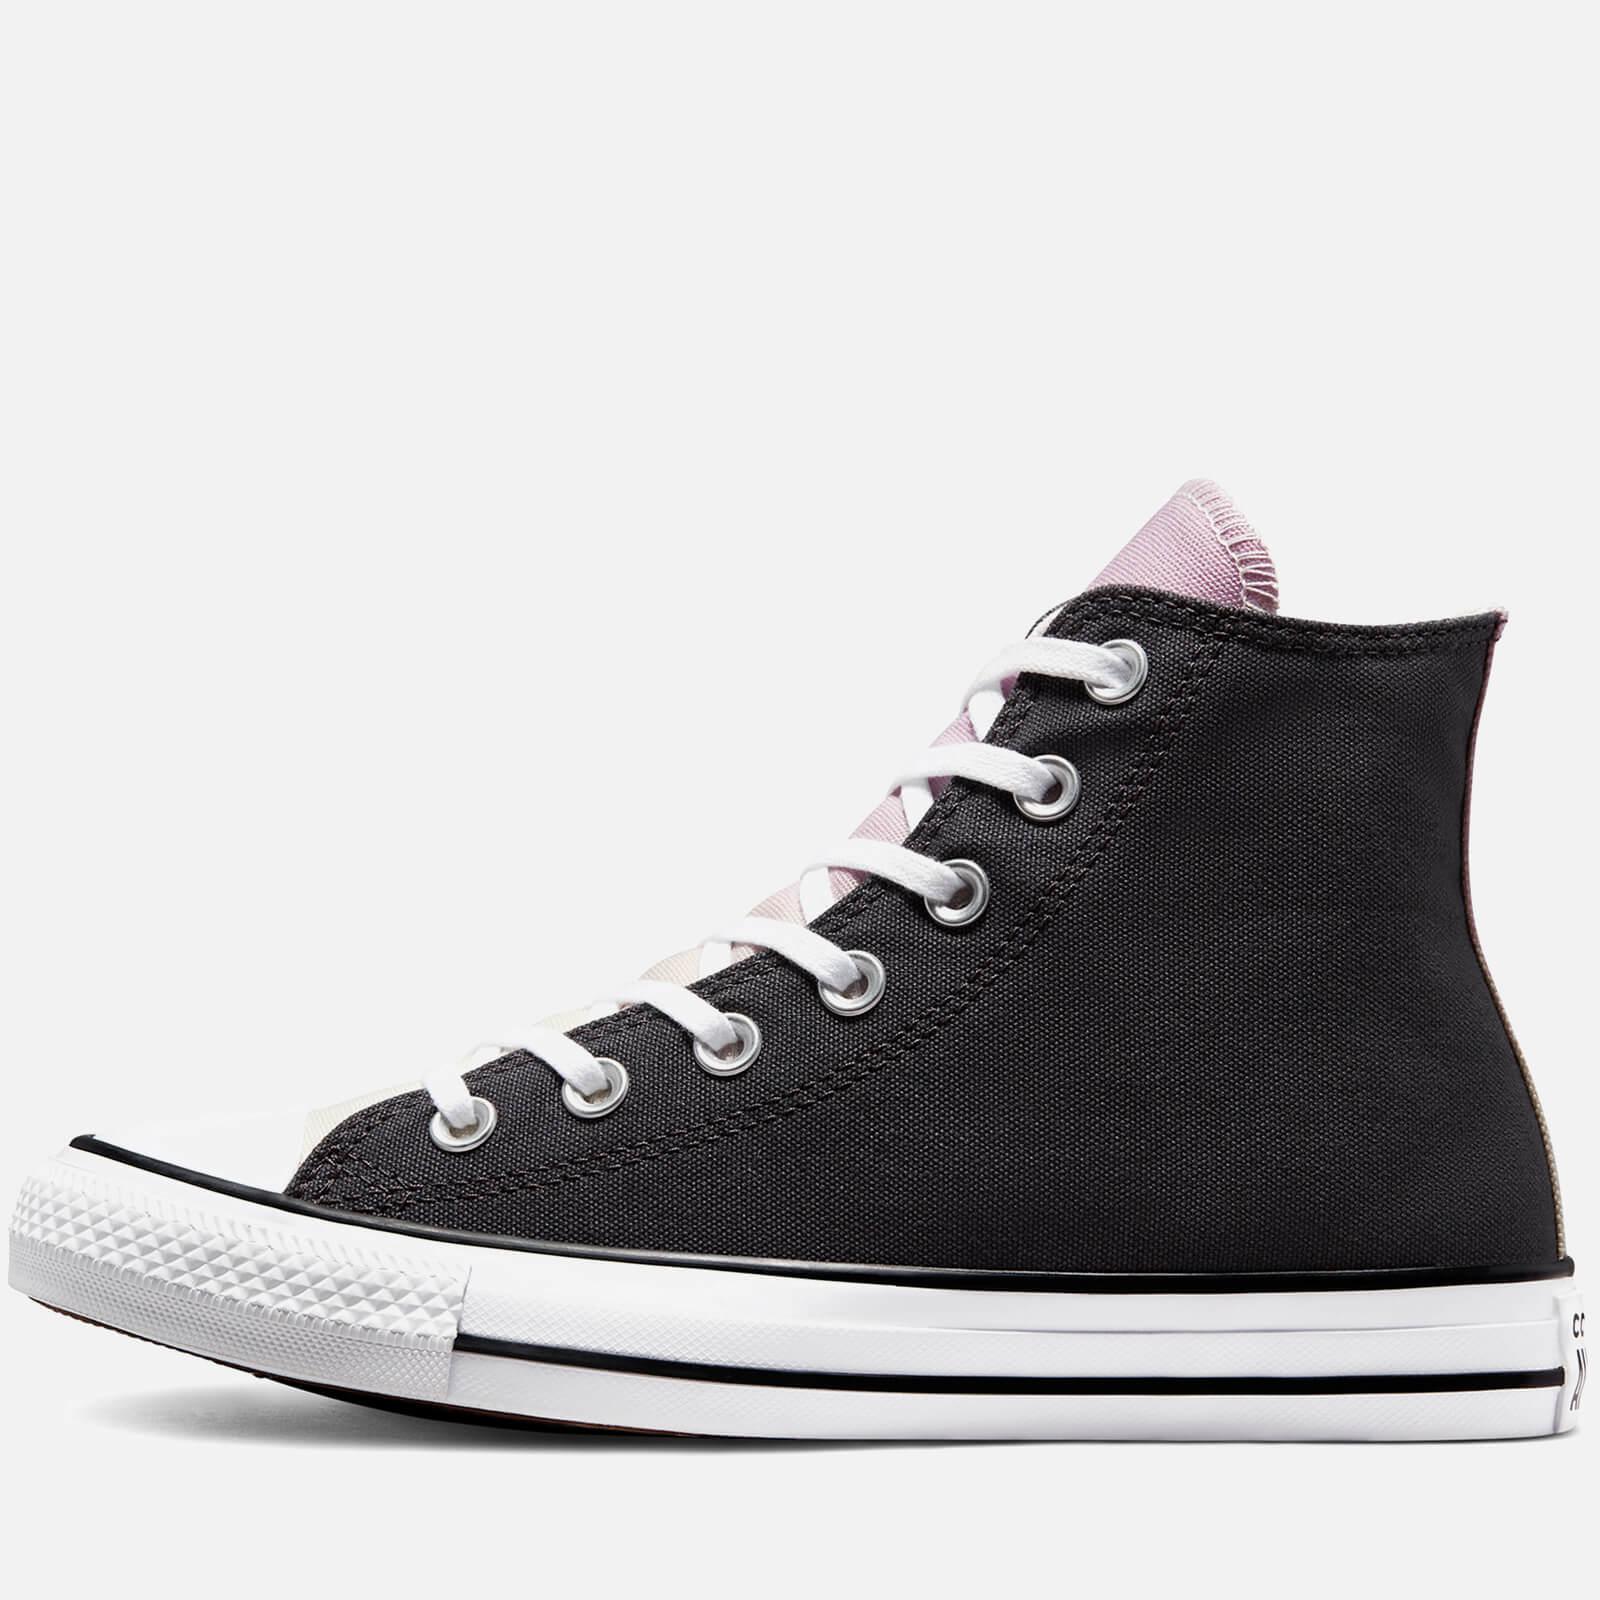 Converse Chuck Taylor All Star Ombré Hi-top Trainers in Black | Lyst